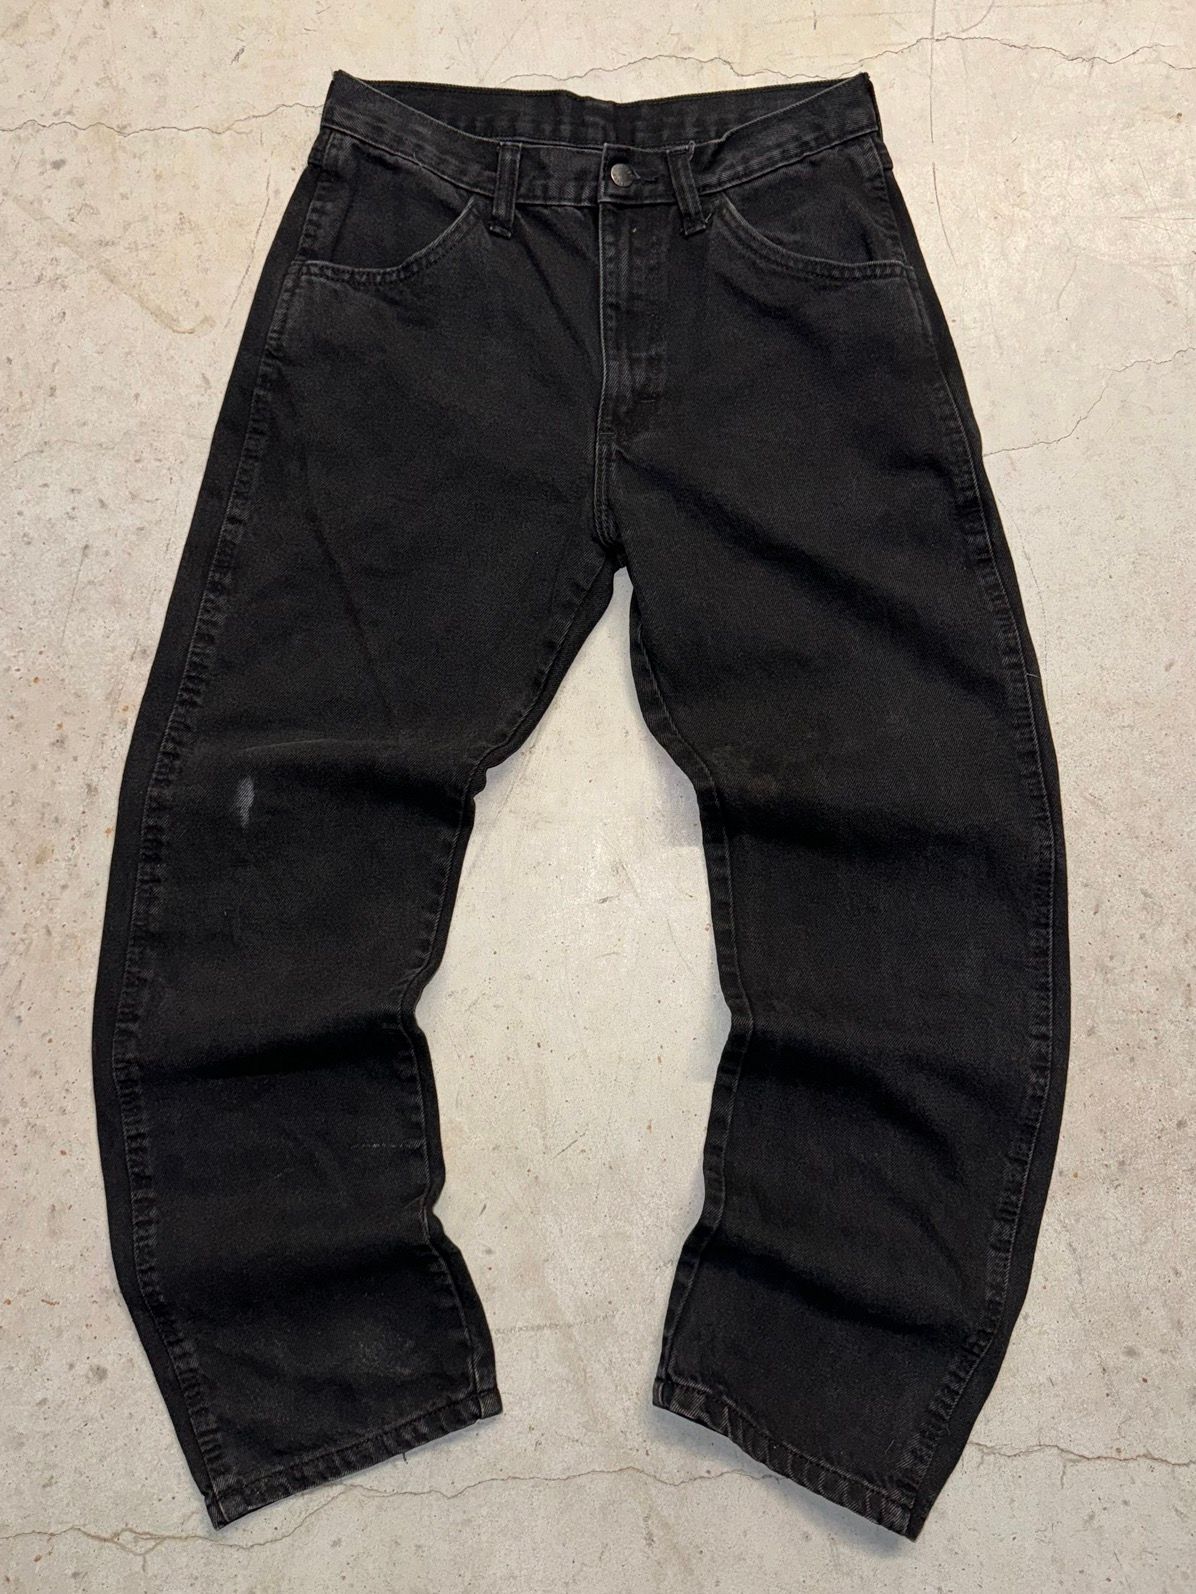 Vintage Crazy Vintage 90s Carhartt Style Faded Black Baggy Jeans Size US 31 - 1 Preview